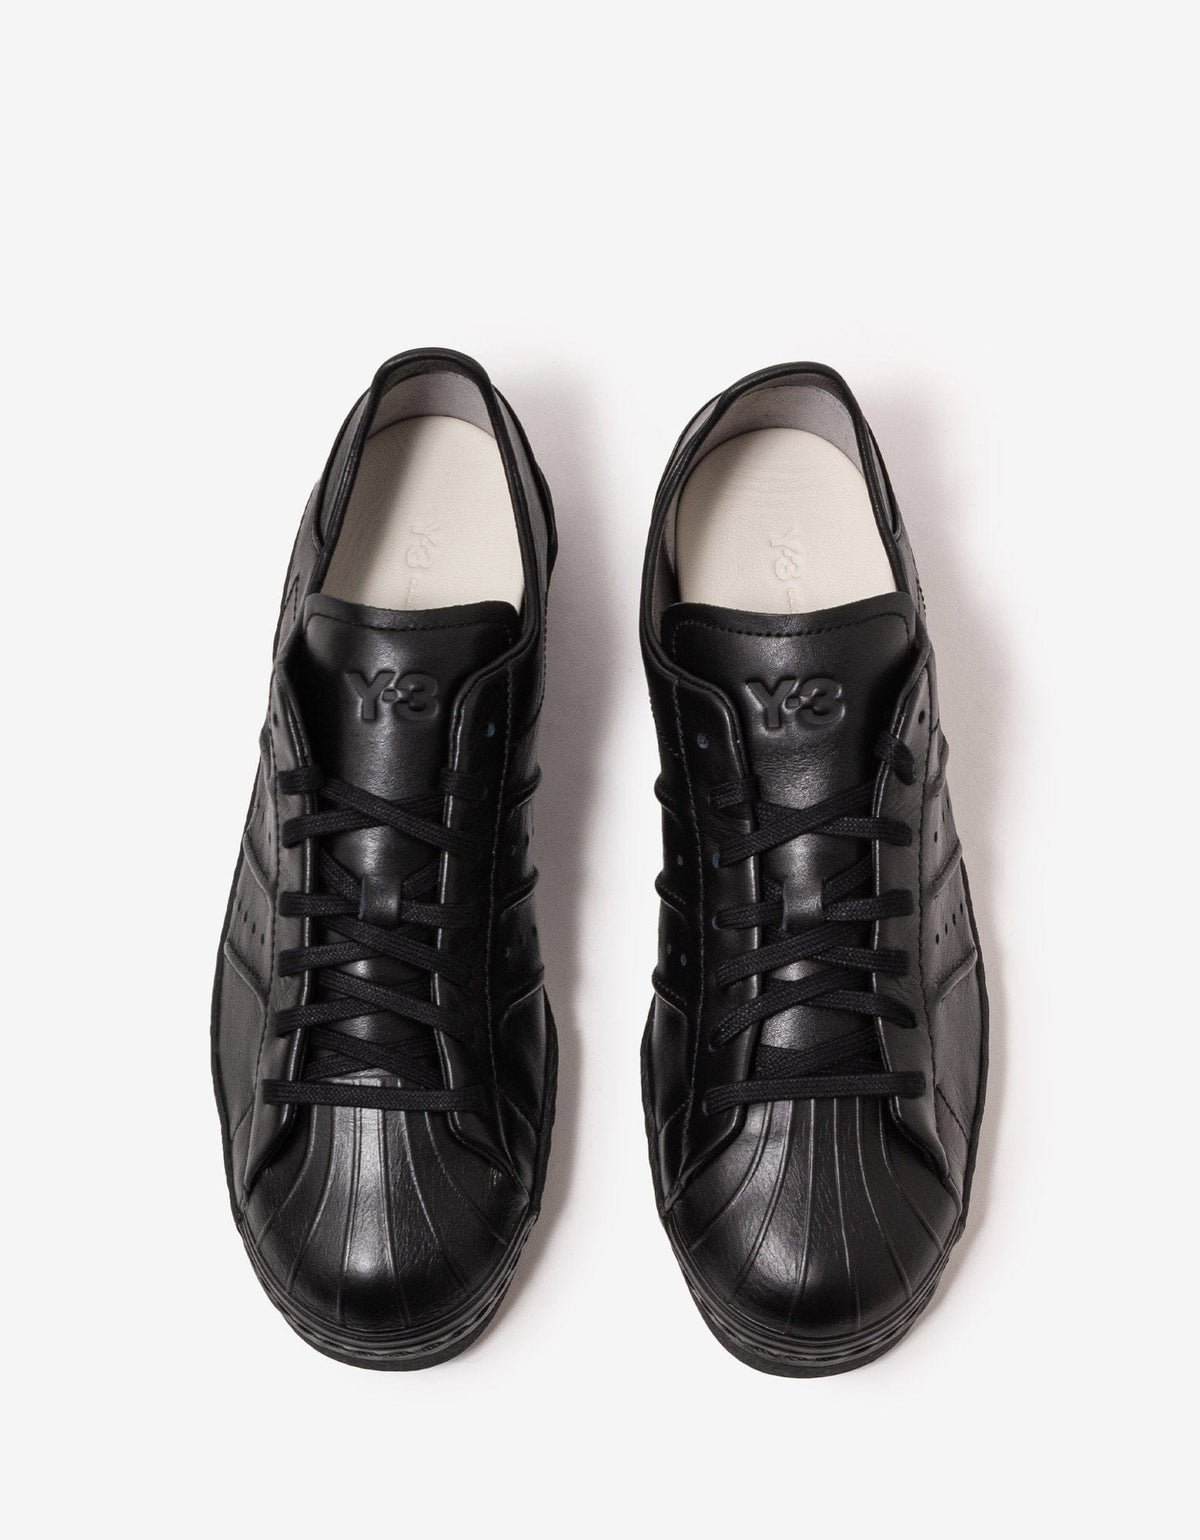 Y-3 Black Leather Superstar Trainers